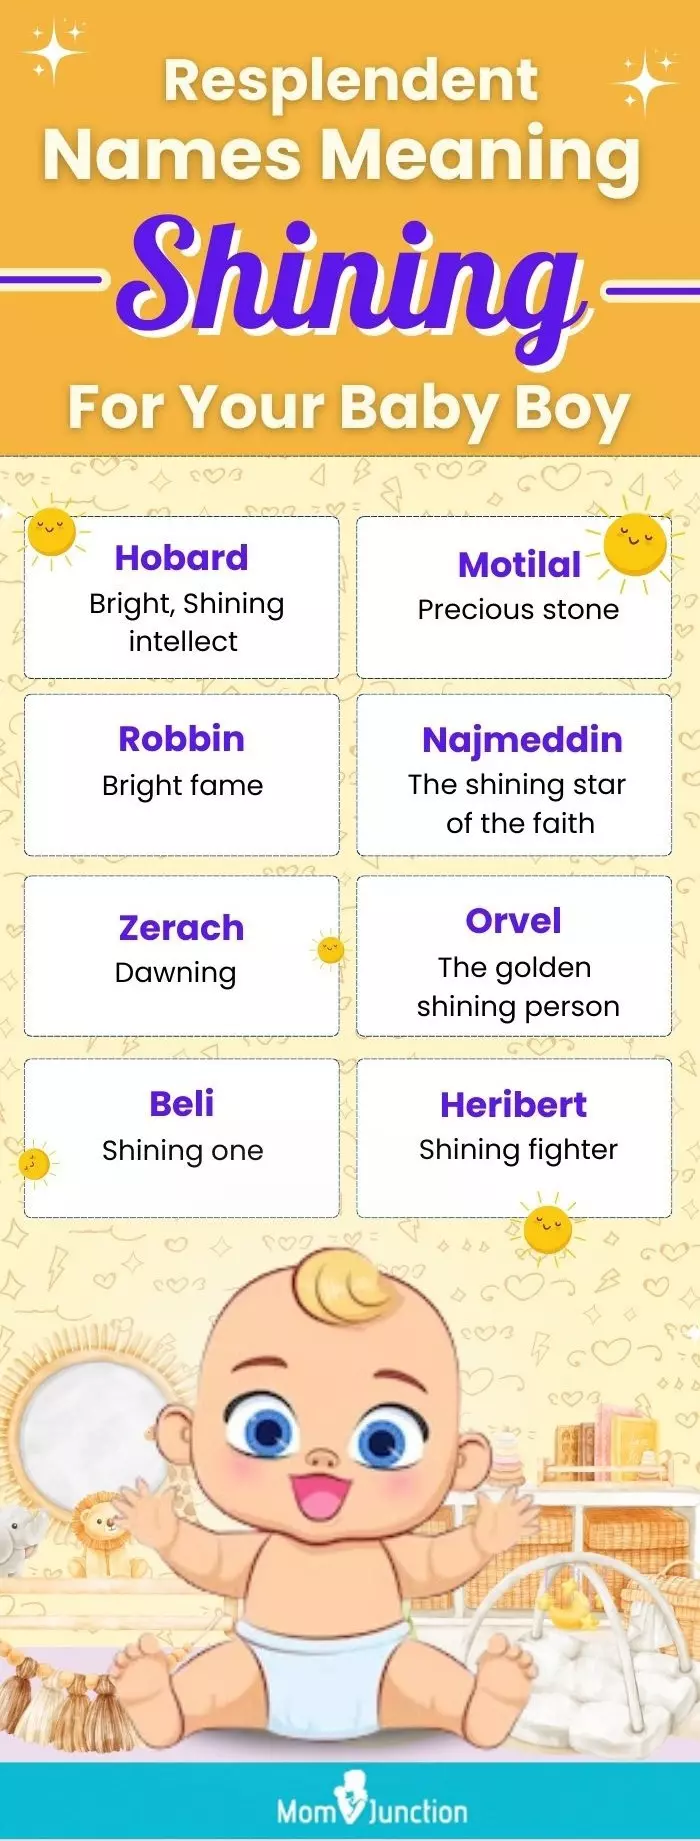 resplendent names meaning shining for your baby boy (infographic)